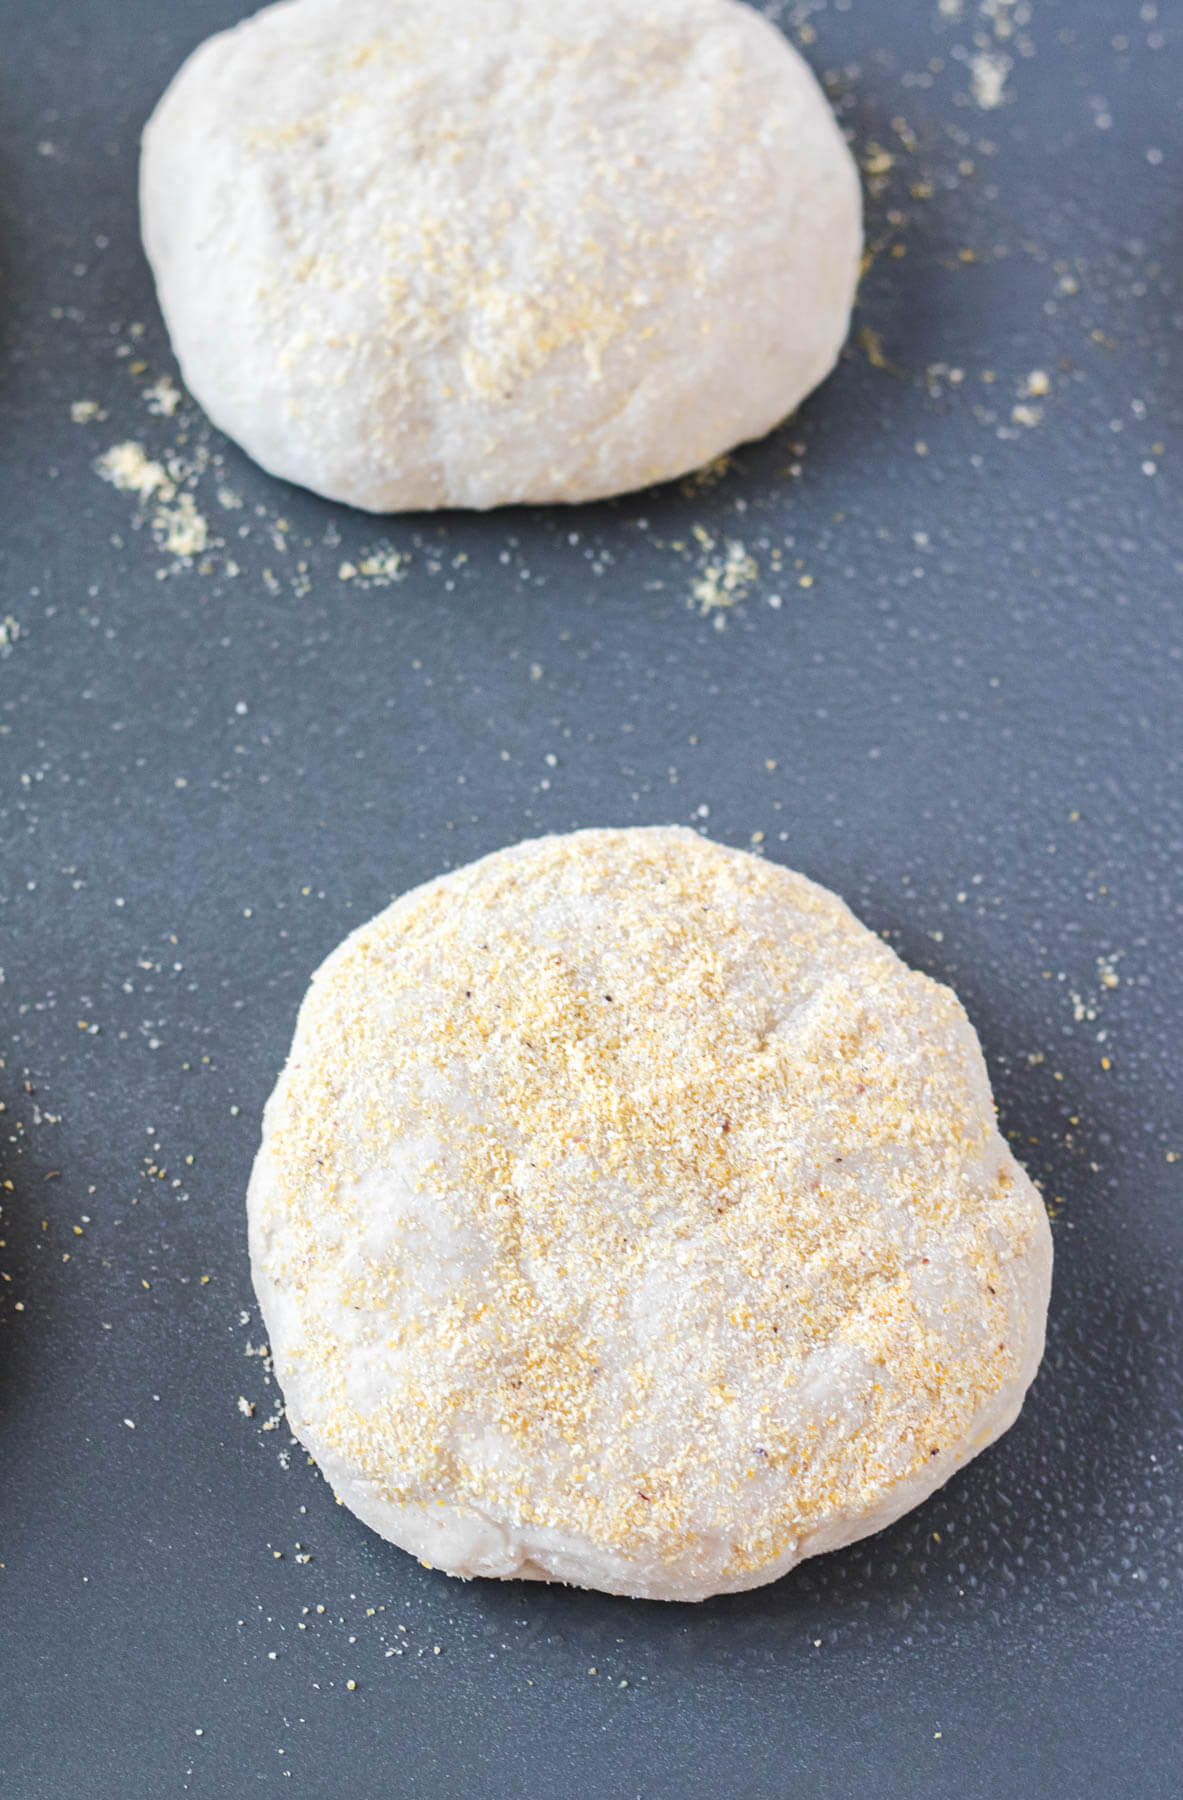 Process shot for English muffin recipe featuring shaped two proofed English Muffins, ready for the griddle.